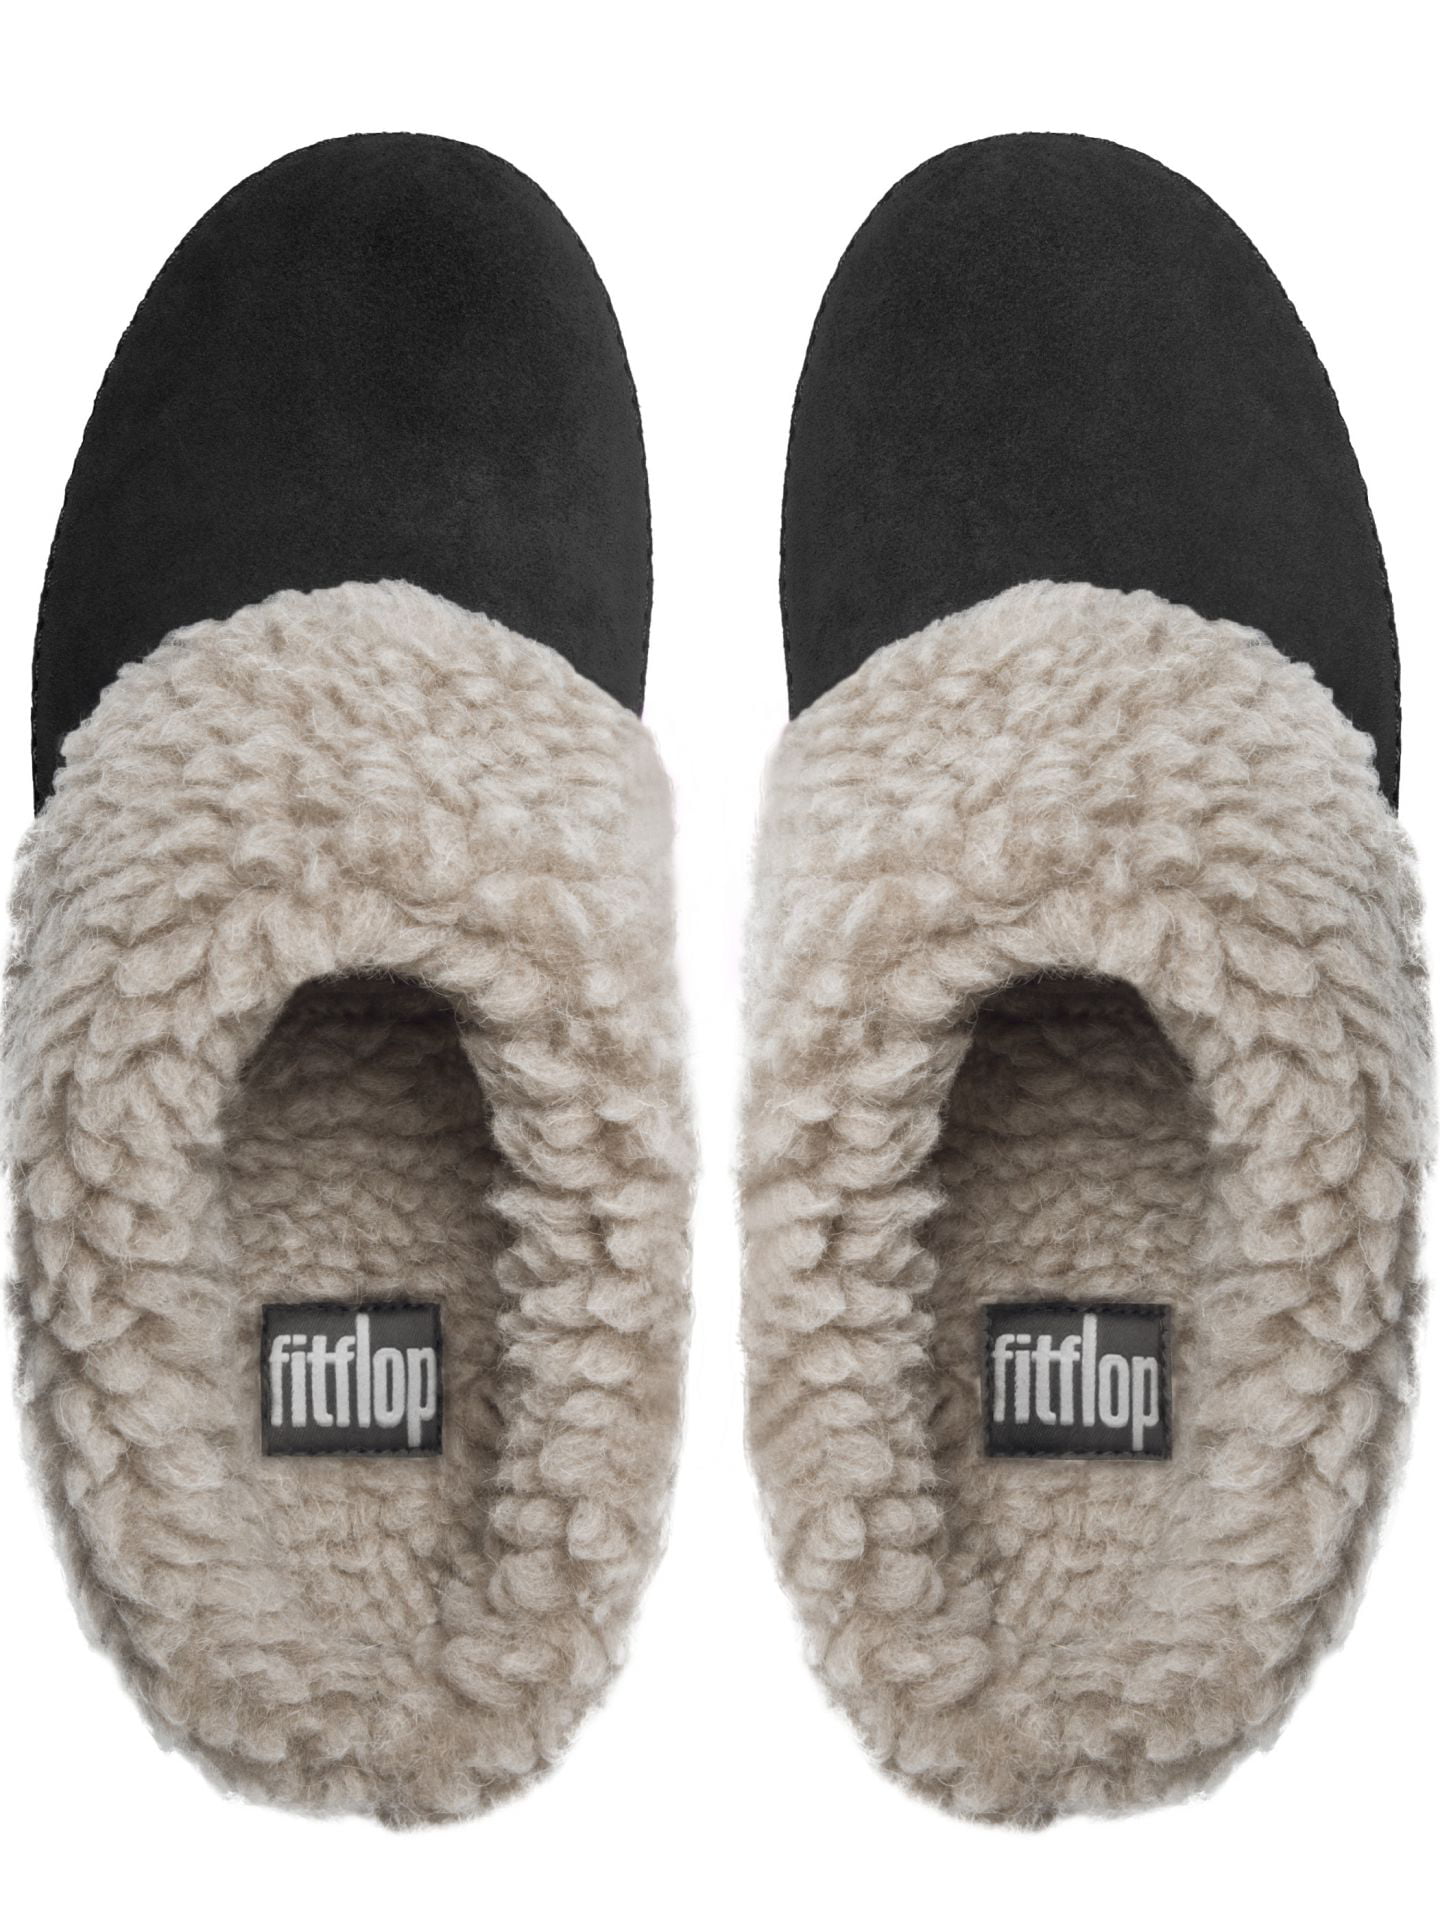 fitflop slippers size 9